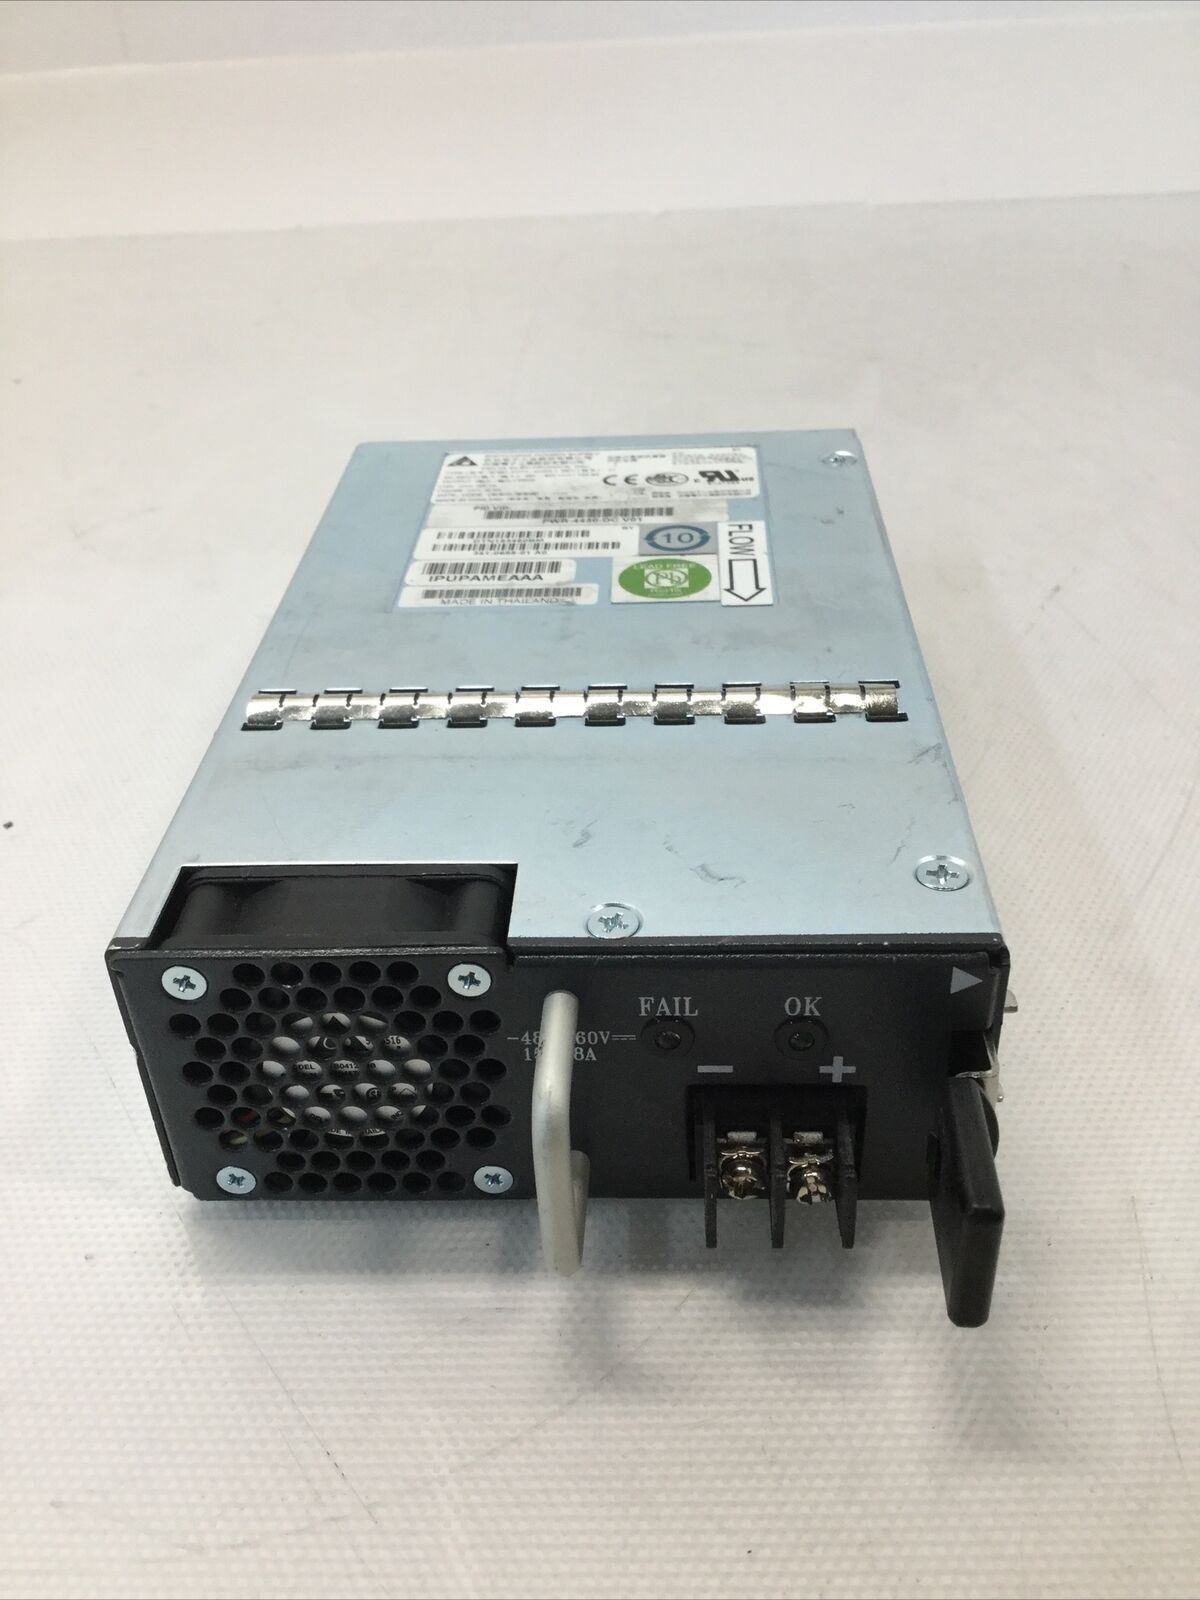 Cisco PWR-4430-DC DC Switching Power Supply for Cisco ISR 4430